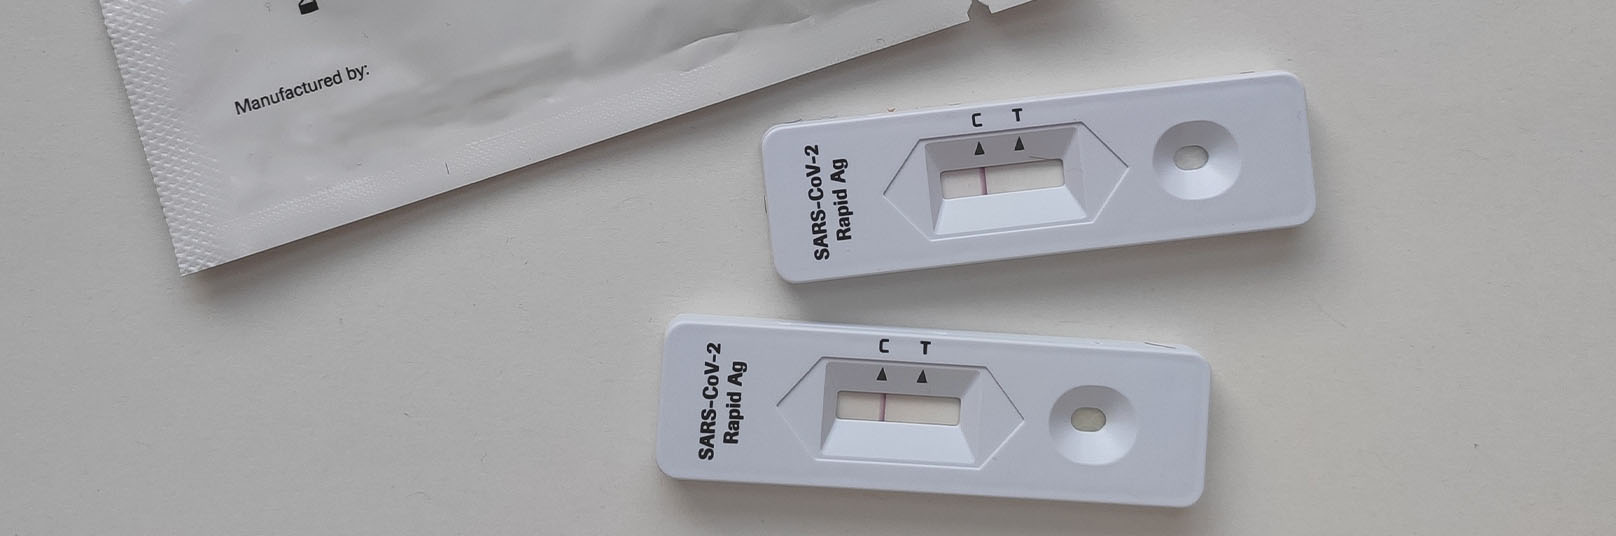 Chinese Hospital, in partnership with SFDPH, makes at-home COVID-19 test kits available for the community